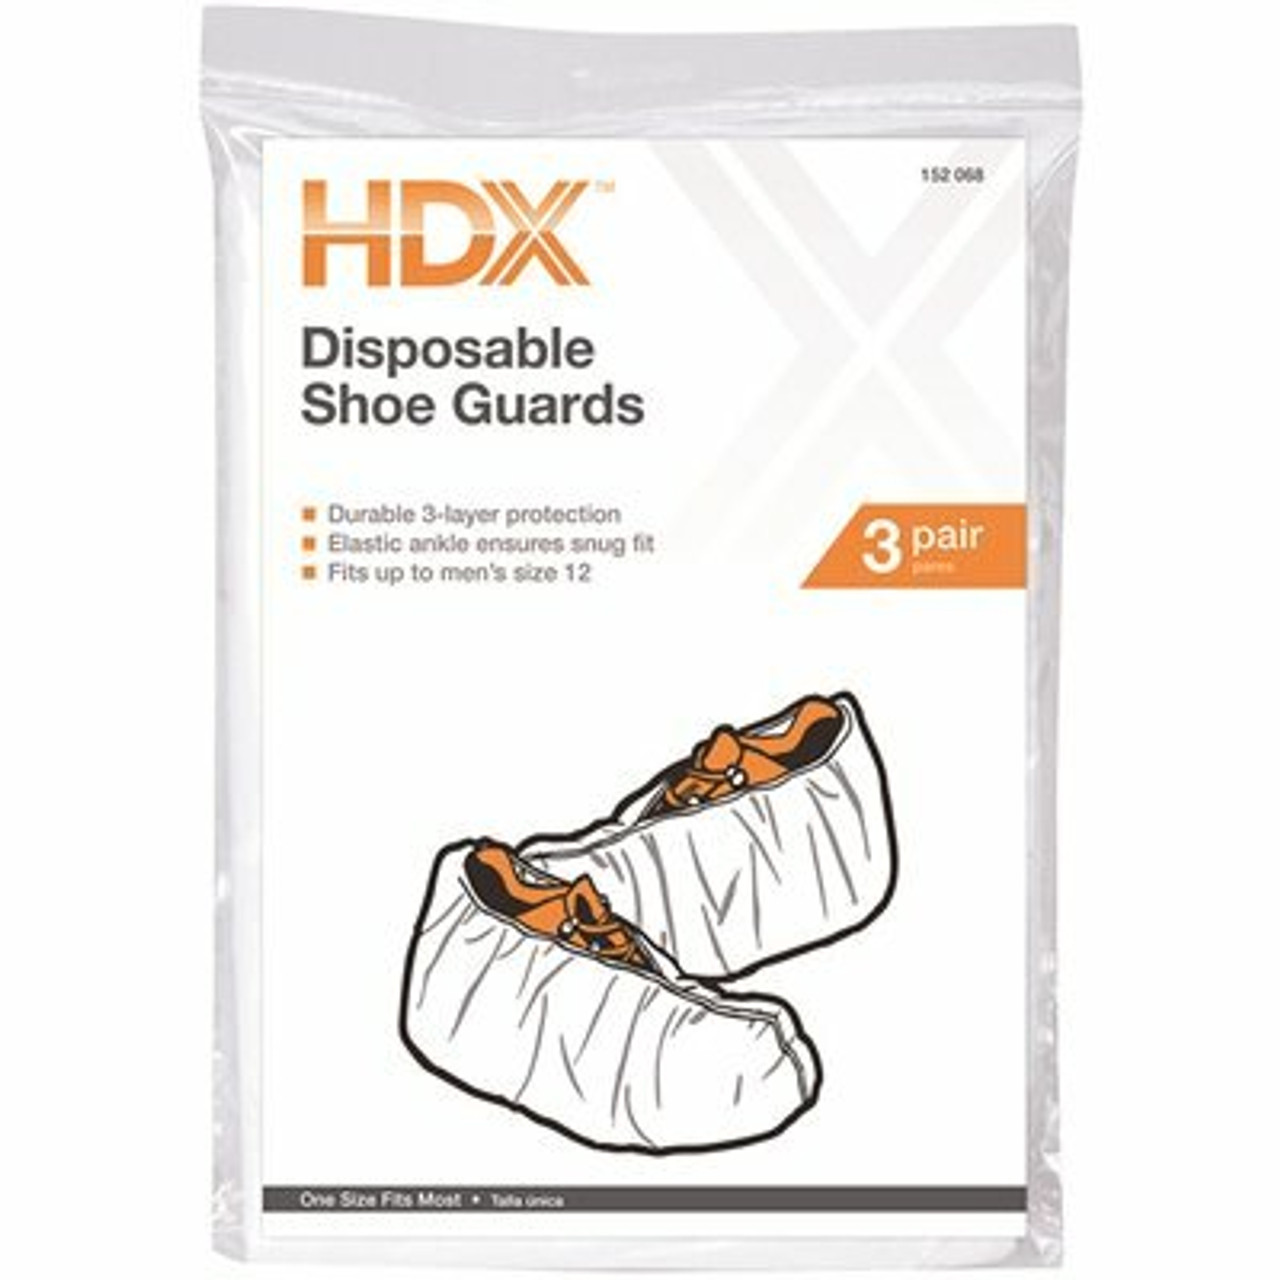 Hdx Disposable Shoe Covers (3-Pairs)